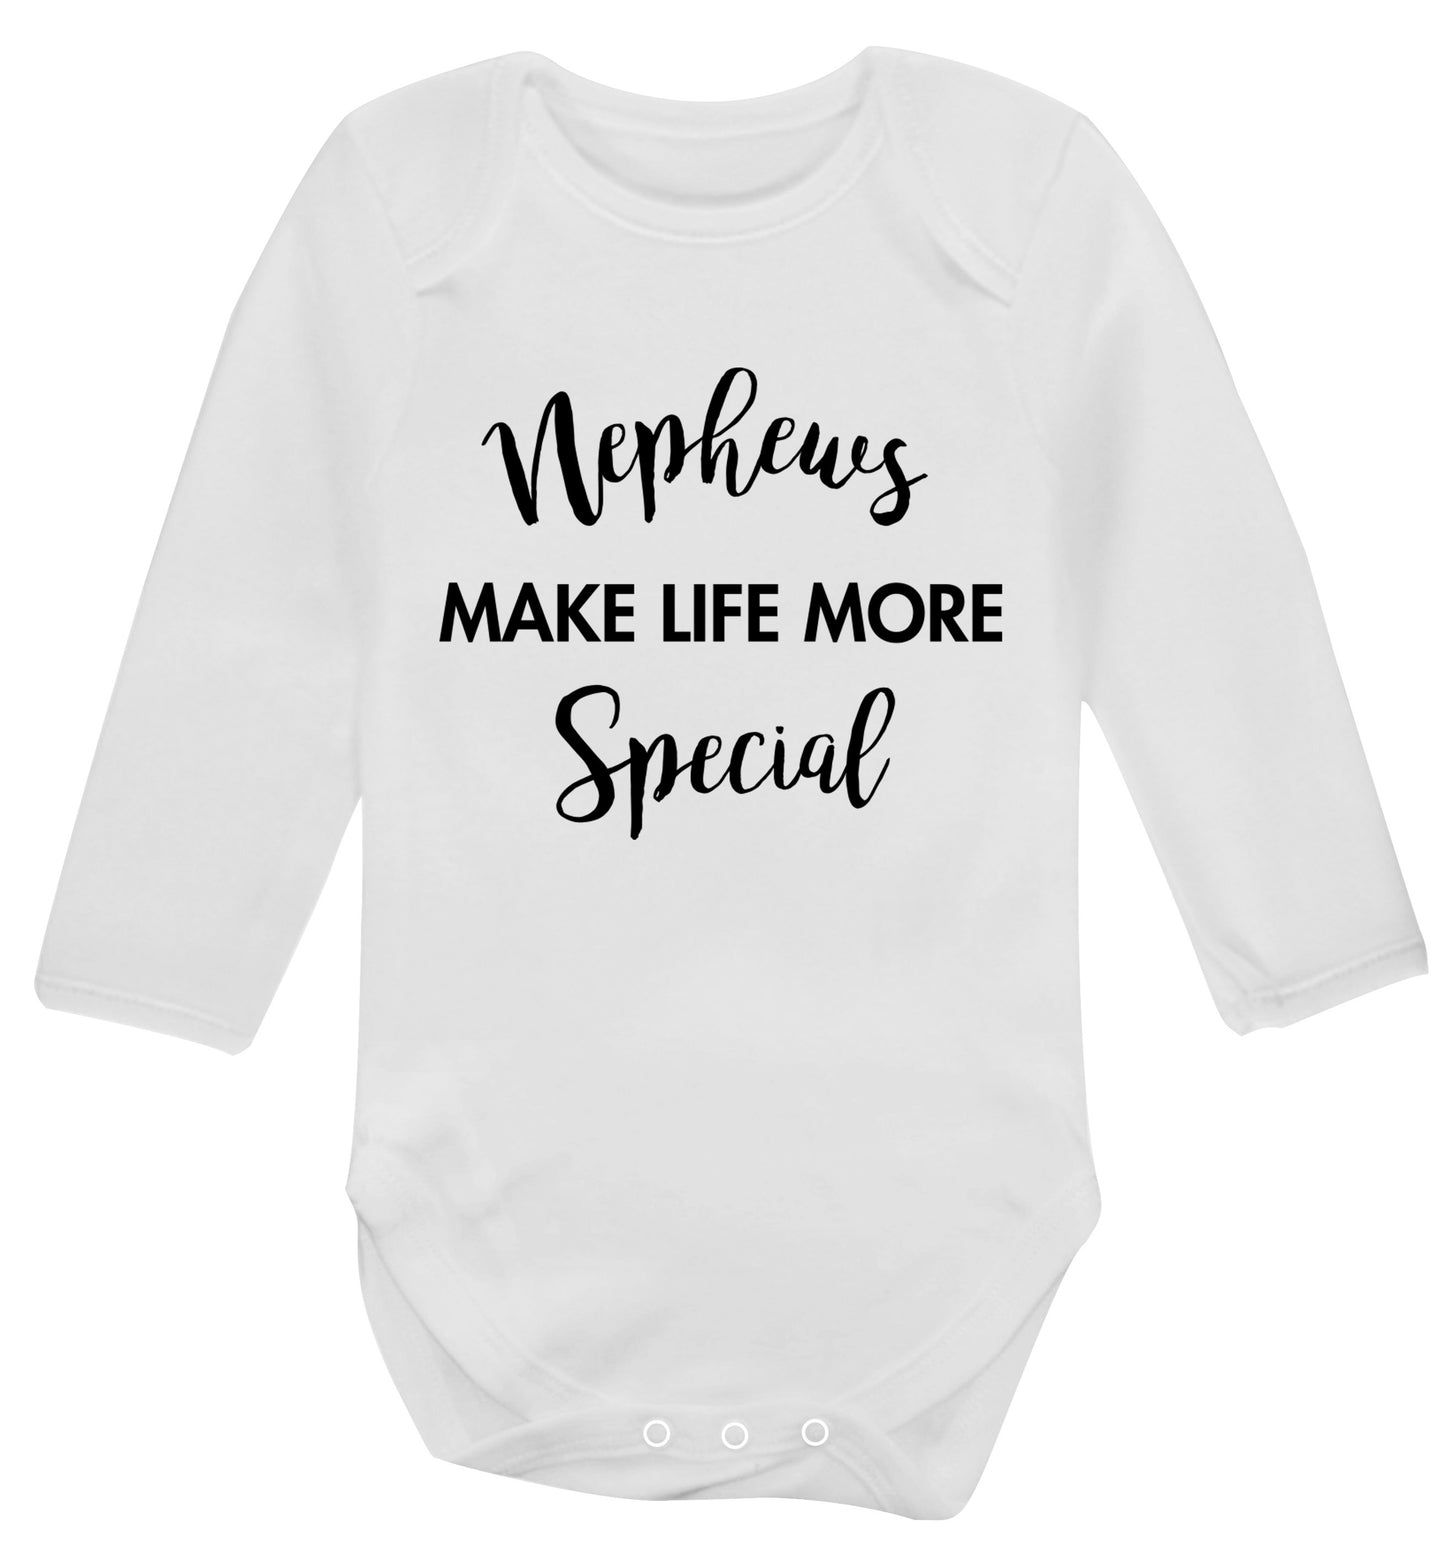 Nephews make life more special Baby Vest long sleeved white 6-12 months